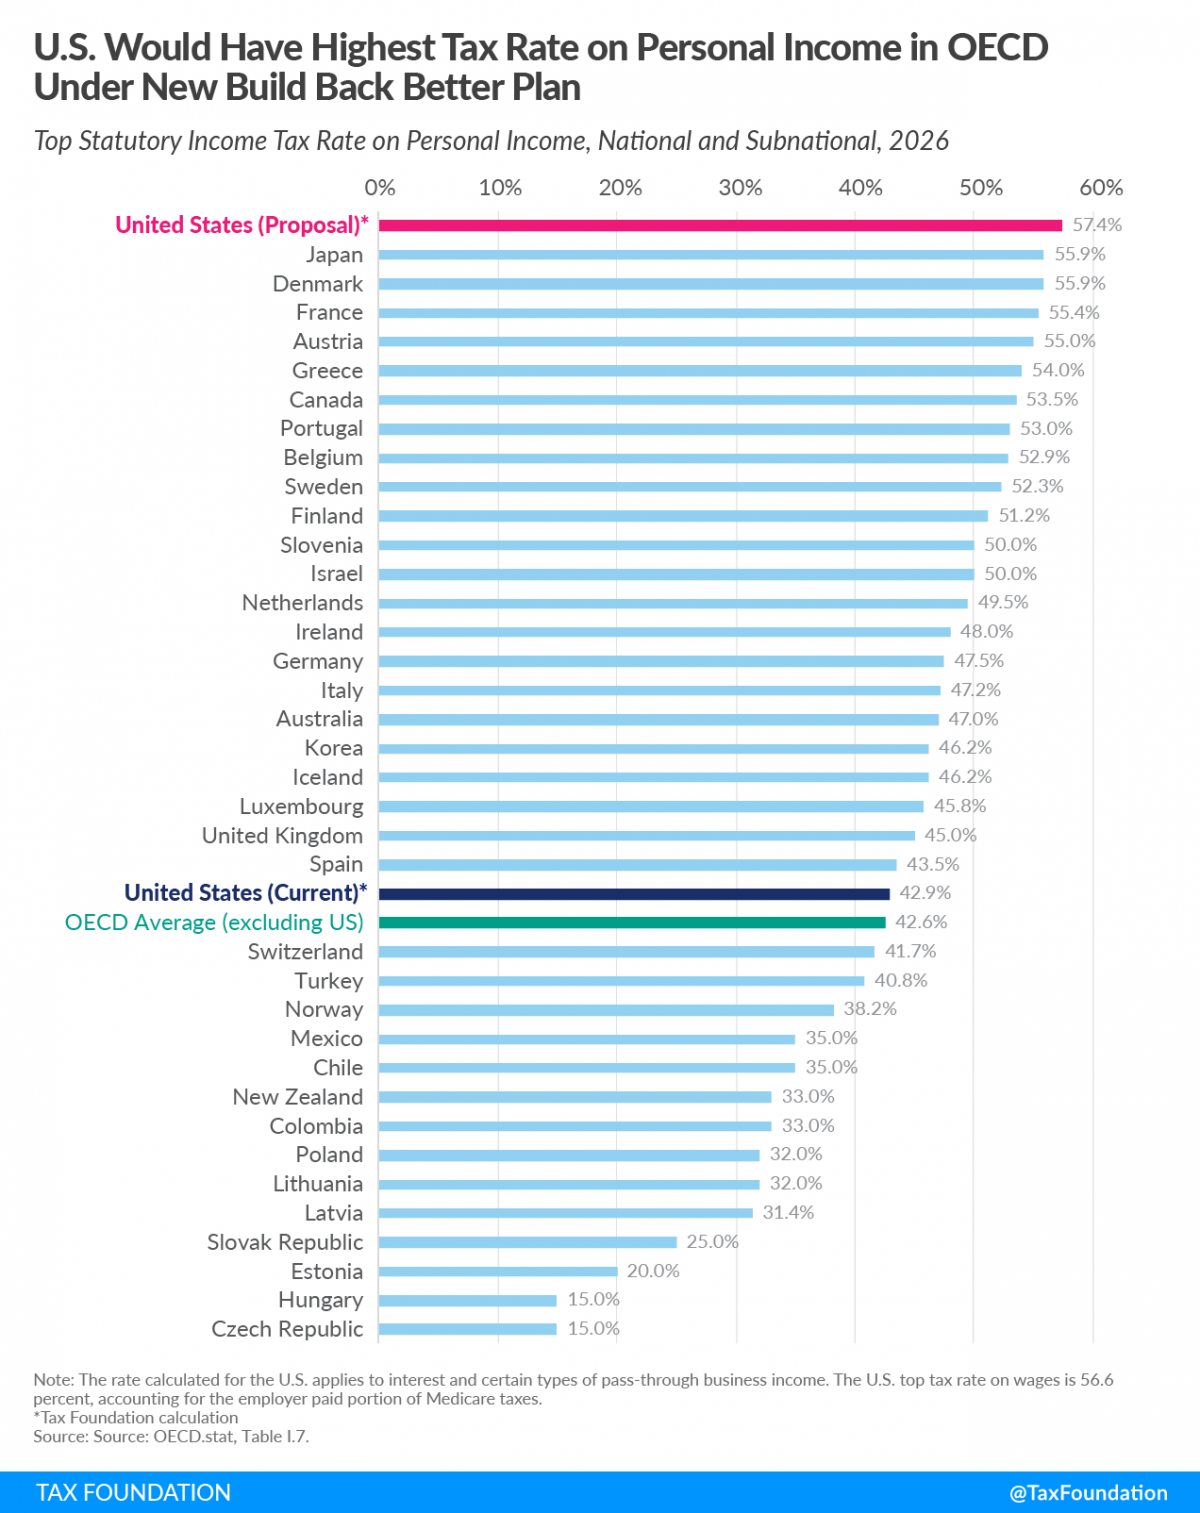 Top-Tax-Rate-on-Personal-Income-Would-Be-Highest-in-OECD-under-New-Build-Back-Better-Framework-rev-1200x1513.png